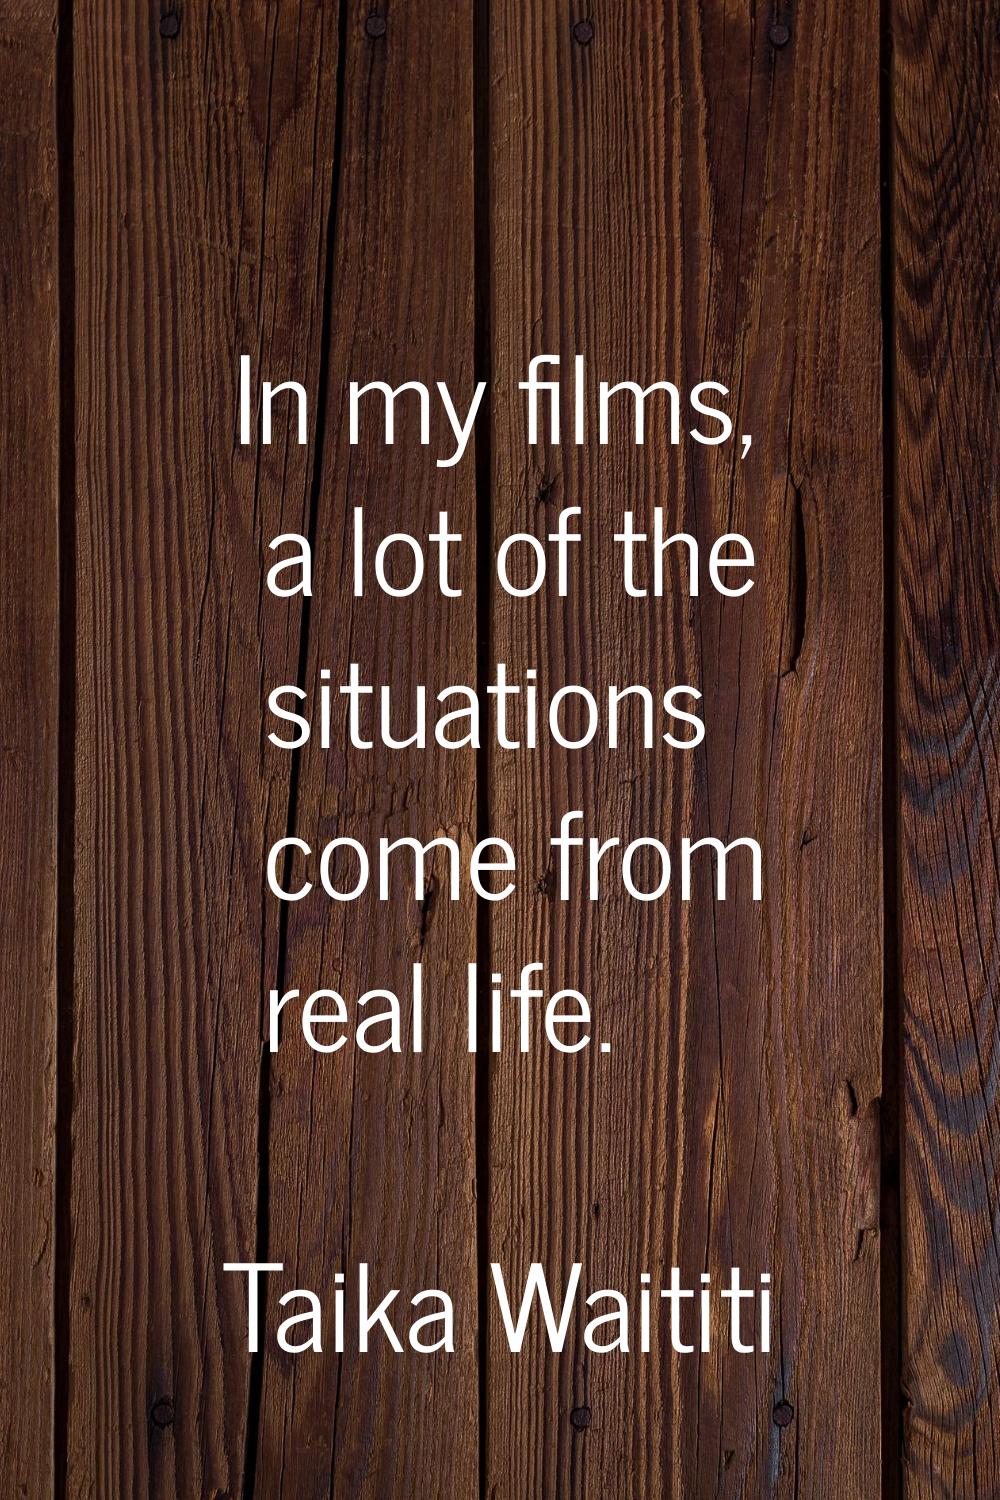 In my films, a lot of the situations come from real life.